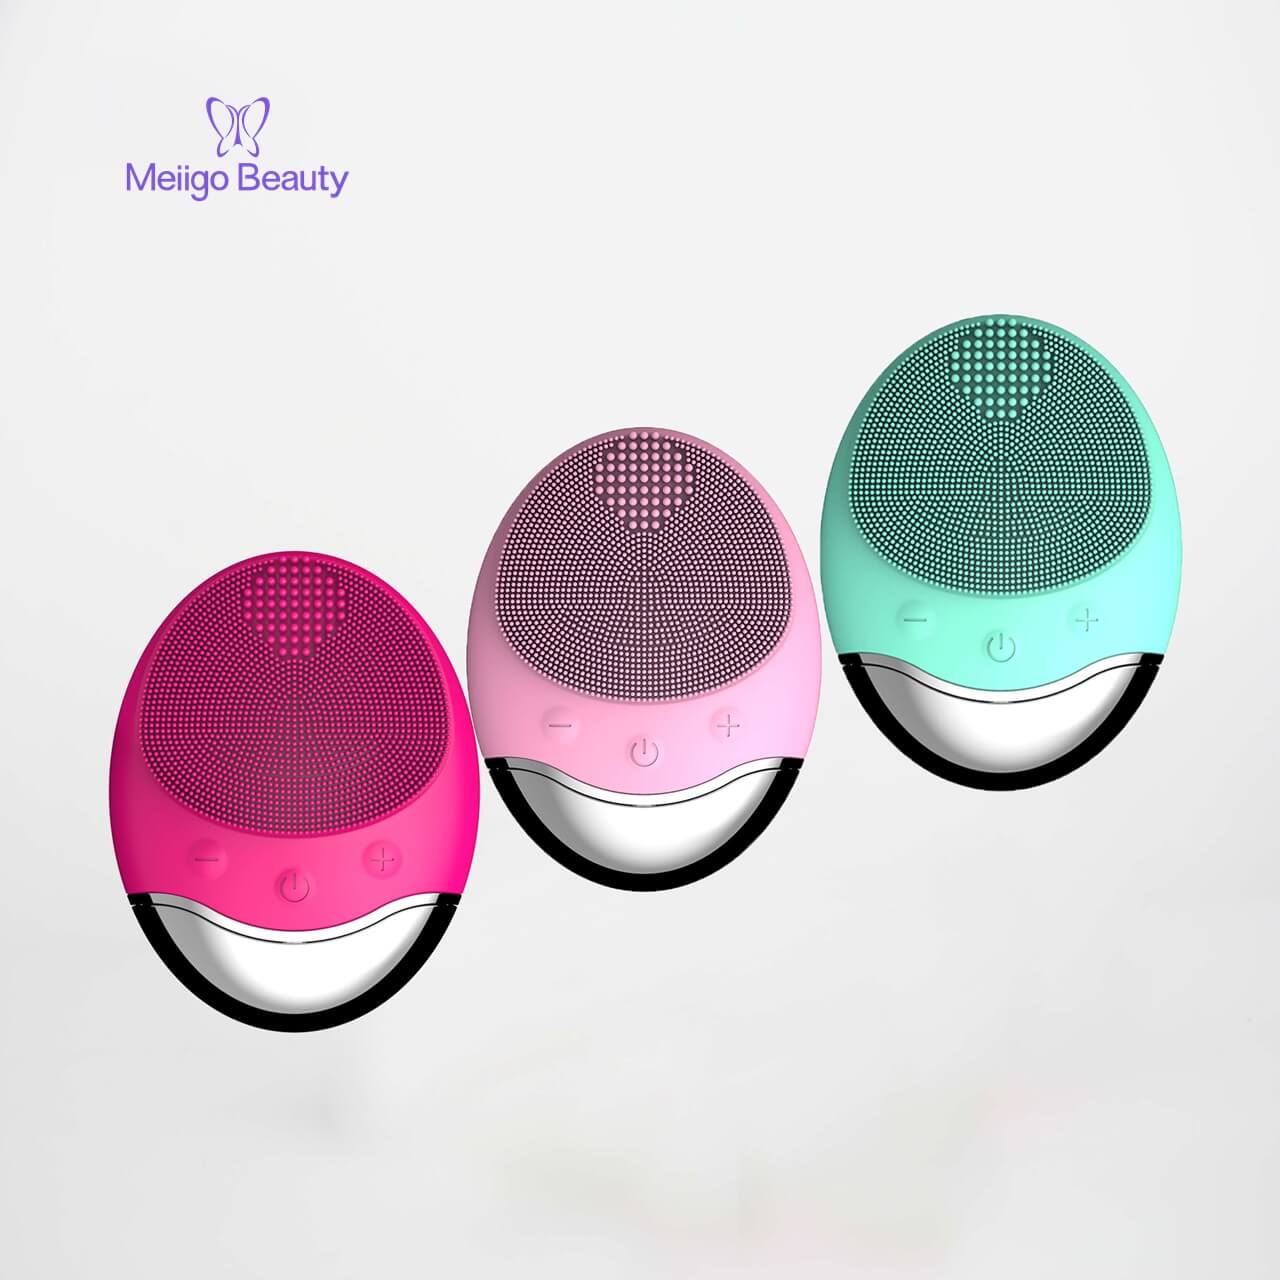 Meiigo beauty silicone face brush BR 003 1 - Sonic facial cleansing brush silicone vibrating cleanser & massager  BR-003